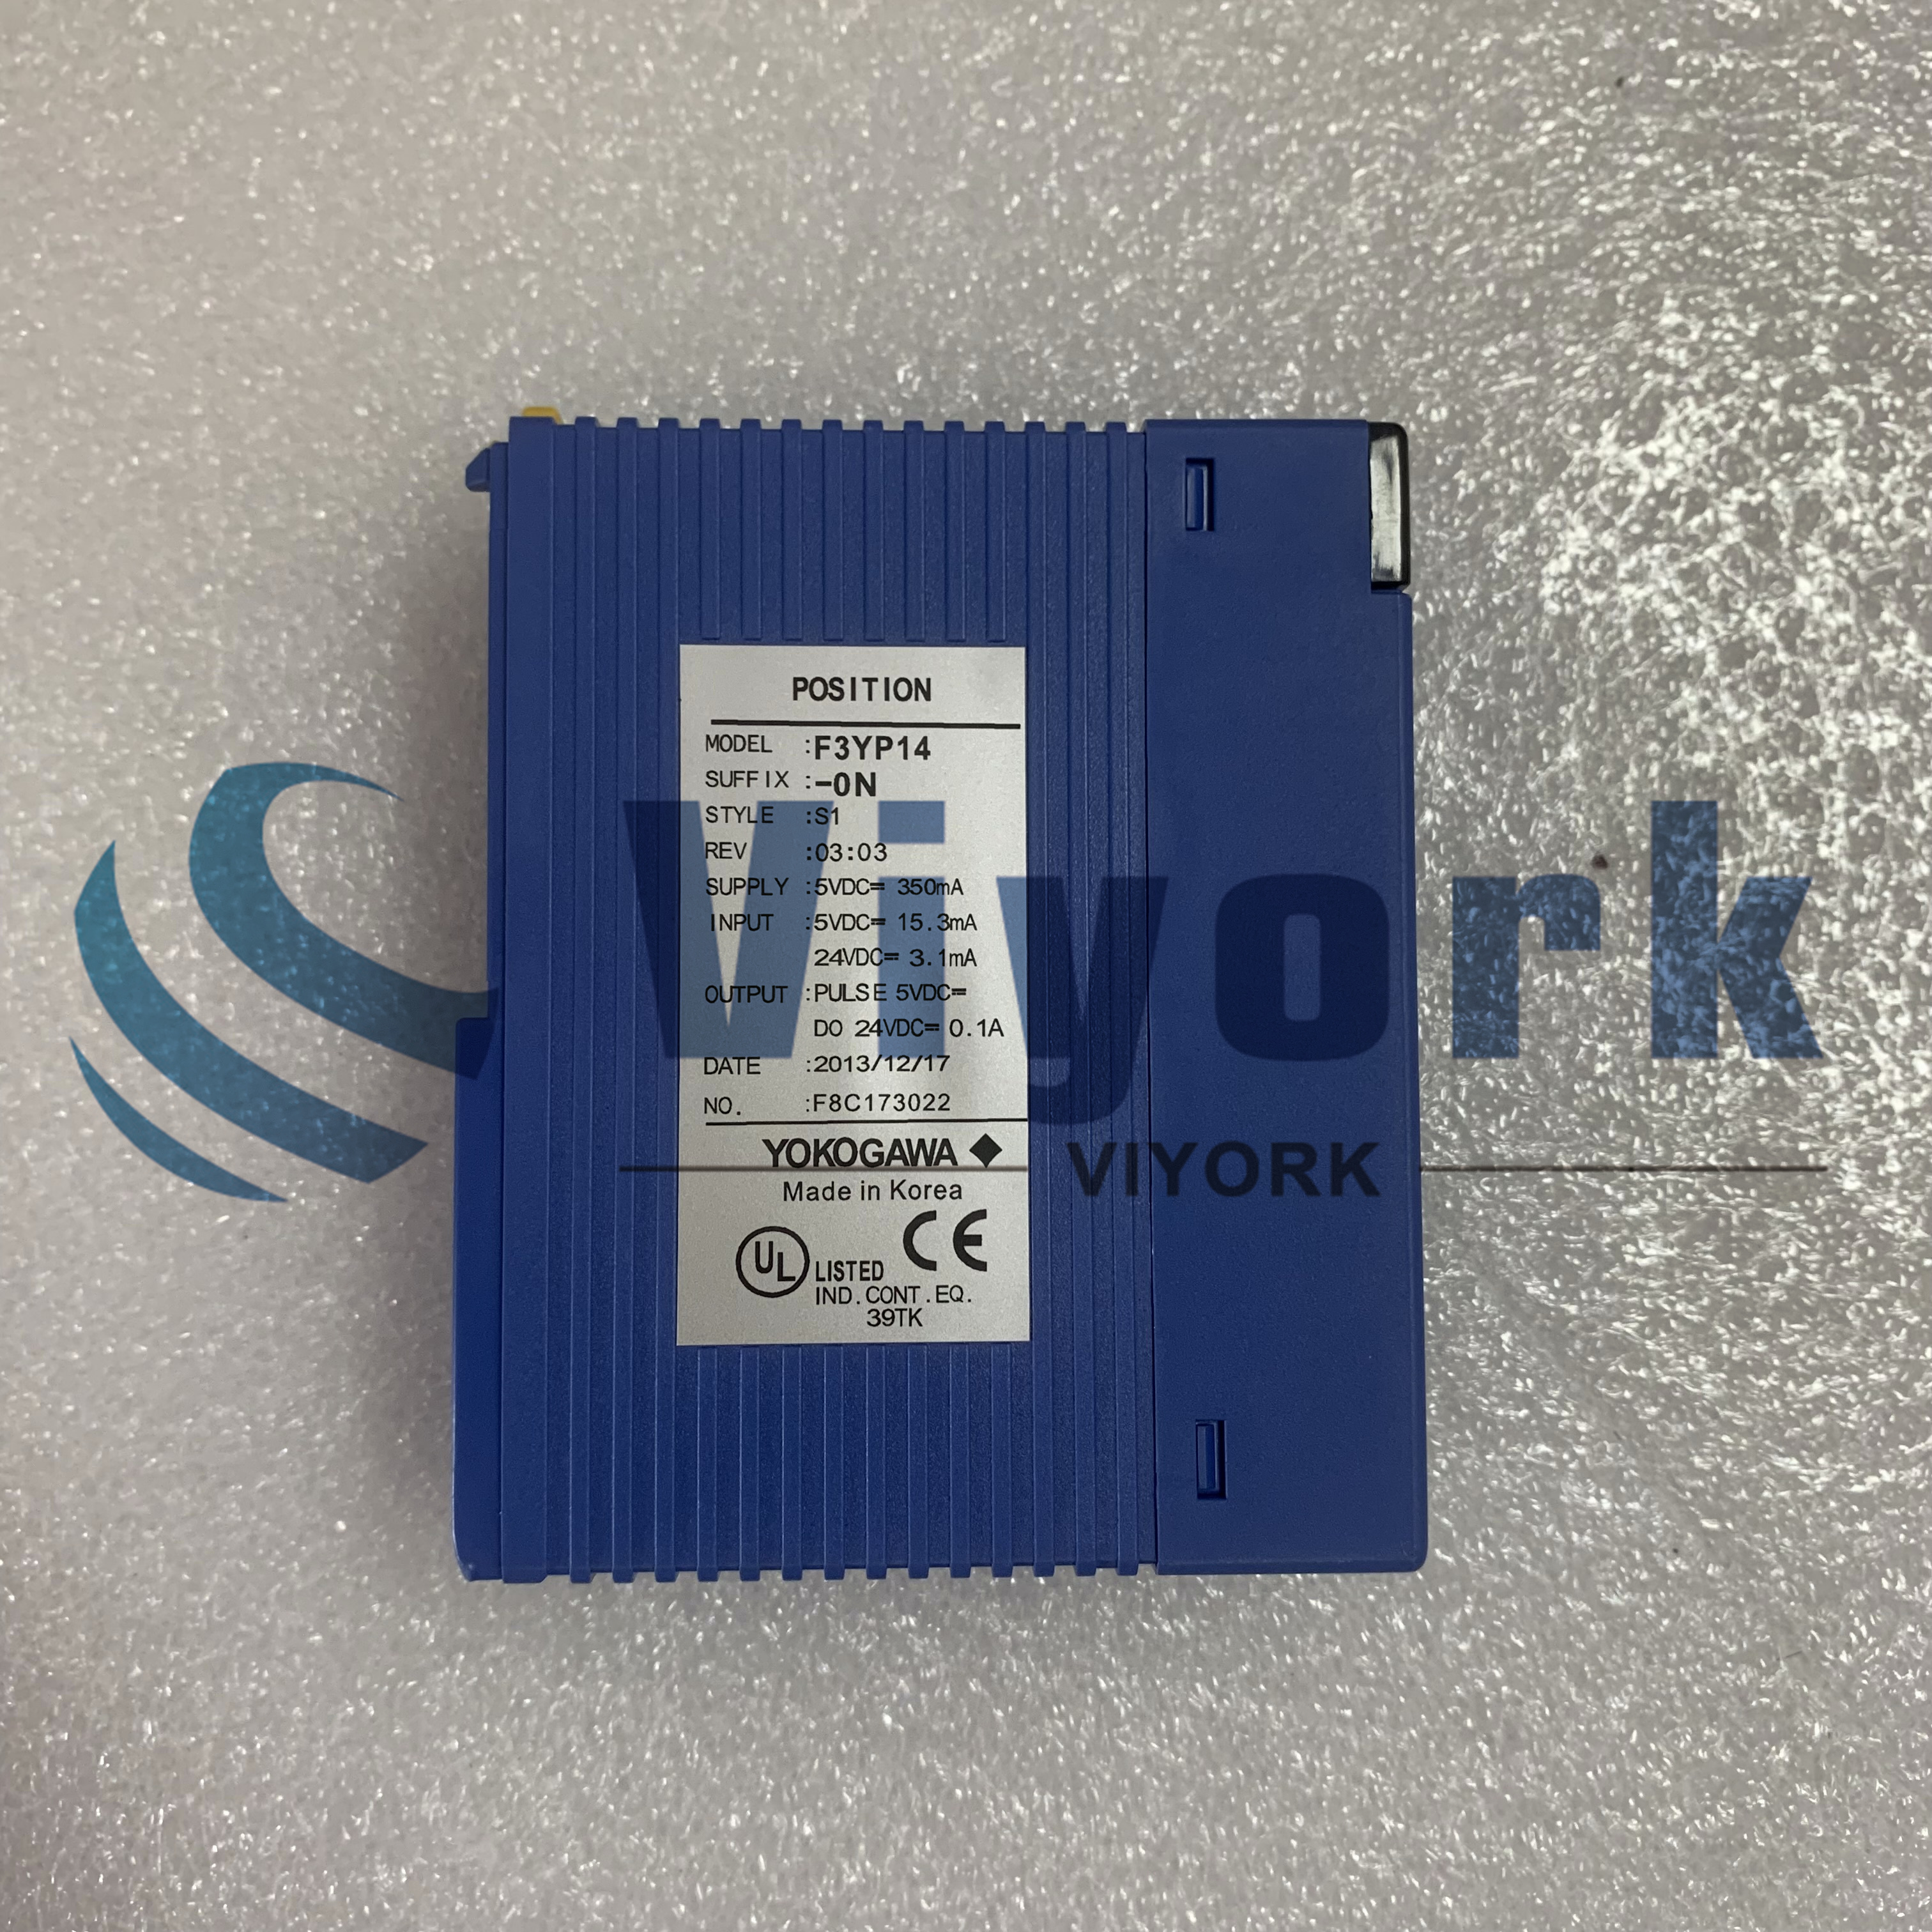 Yokogawa F3YP14-0N POSITIONING MODULE WITH MULTI-CHANNEL PULSE OUT